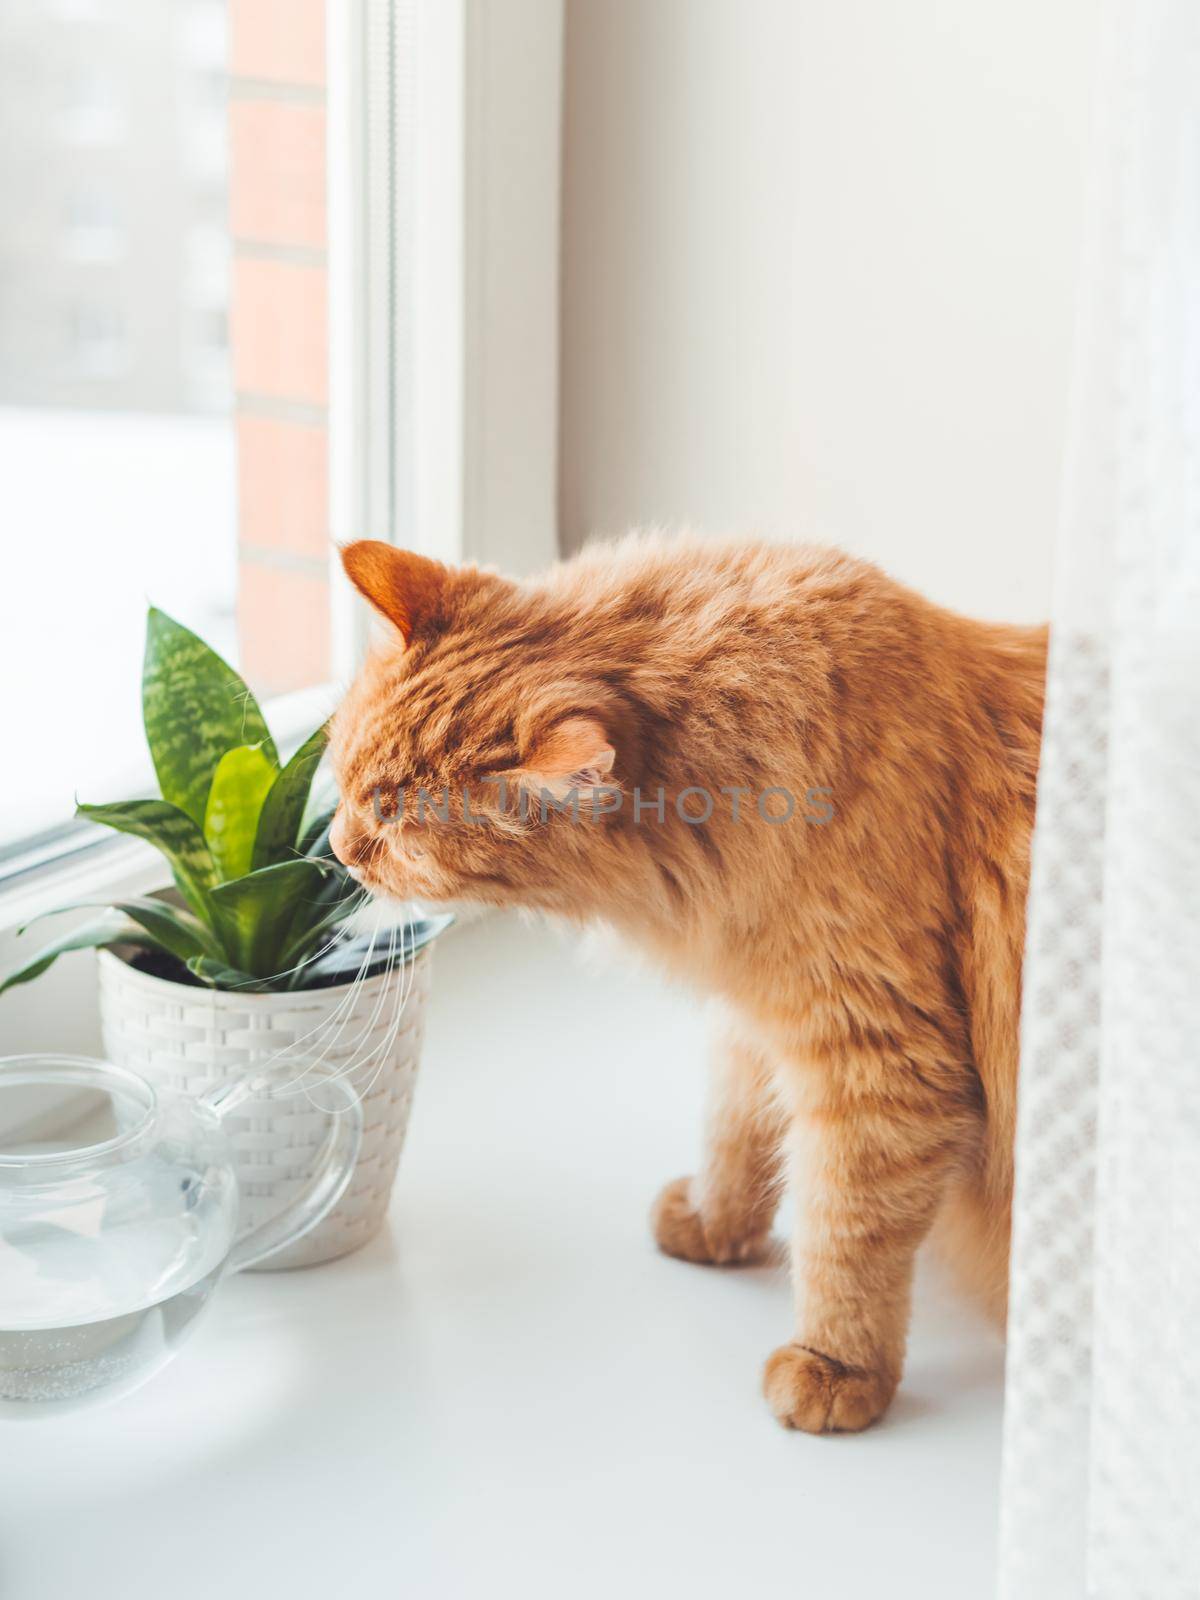 Cute ginger cat sniffs indoors plant. Flower pot with Sansevieria. Fluffy pet smells succulent plants on white window sill. Peaceful botanical hobby. Gardening at home.